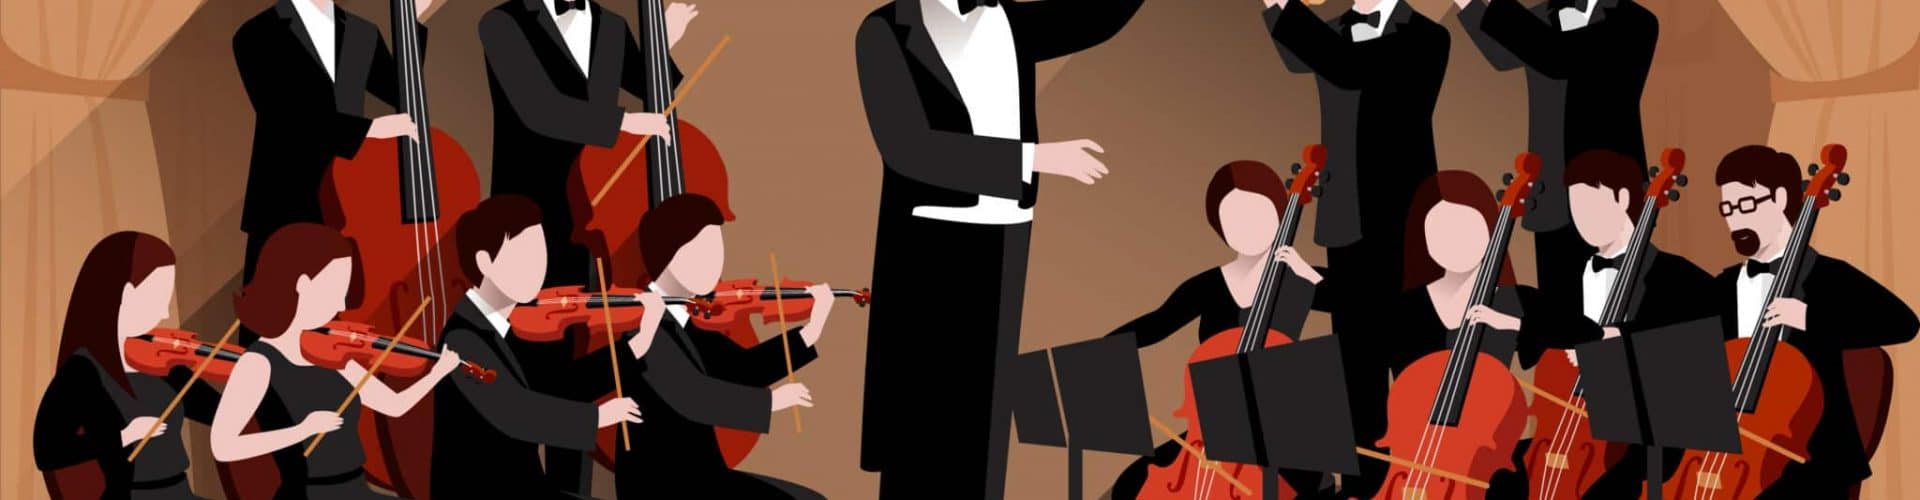 Symphonic orchestra with conductor violins chello and trumpet musicians flat vector illustration